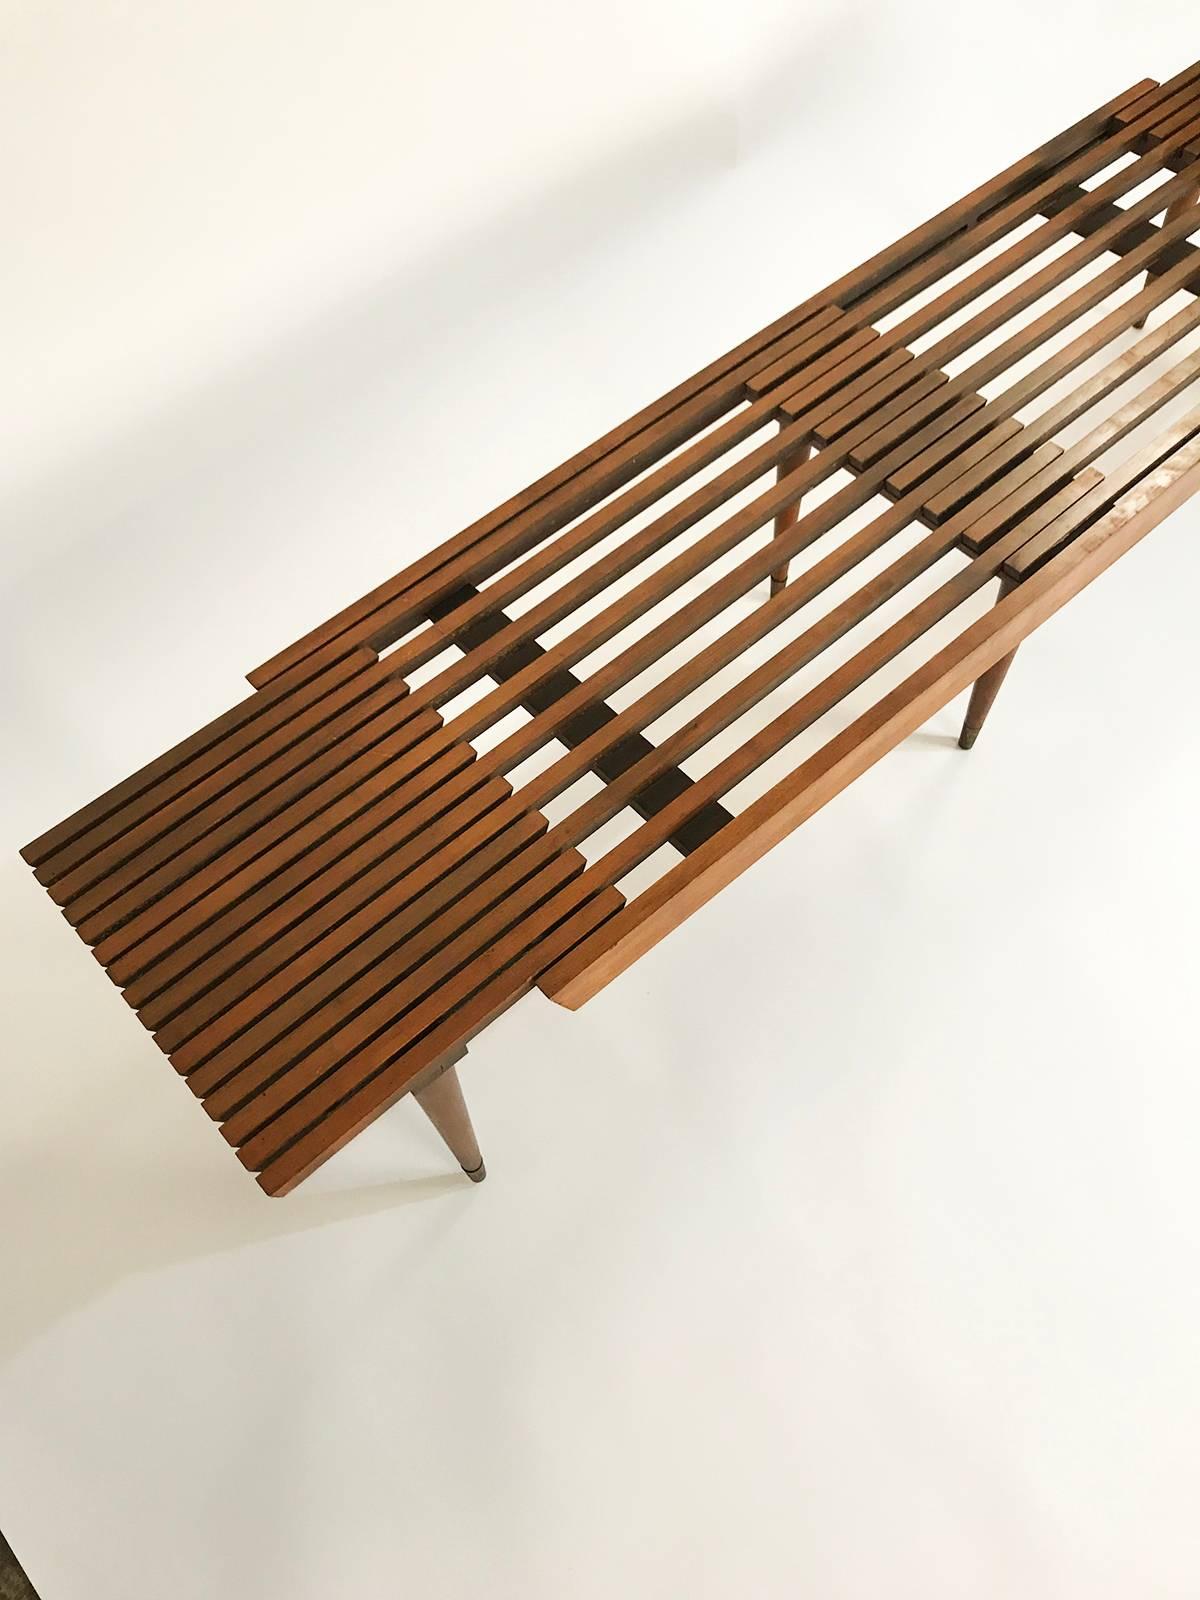 Great midcentury Scandinavian slat bench that expands in width. Grows from 52